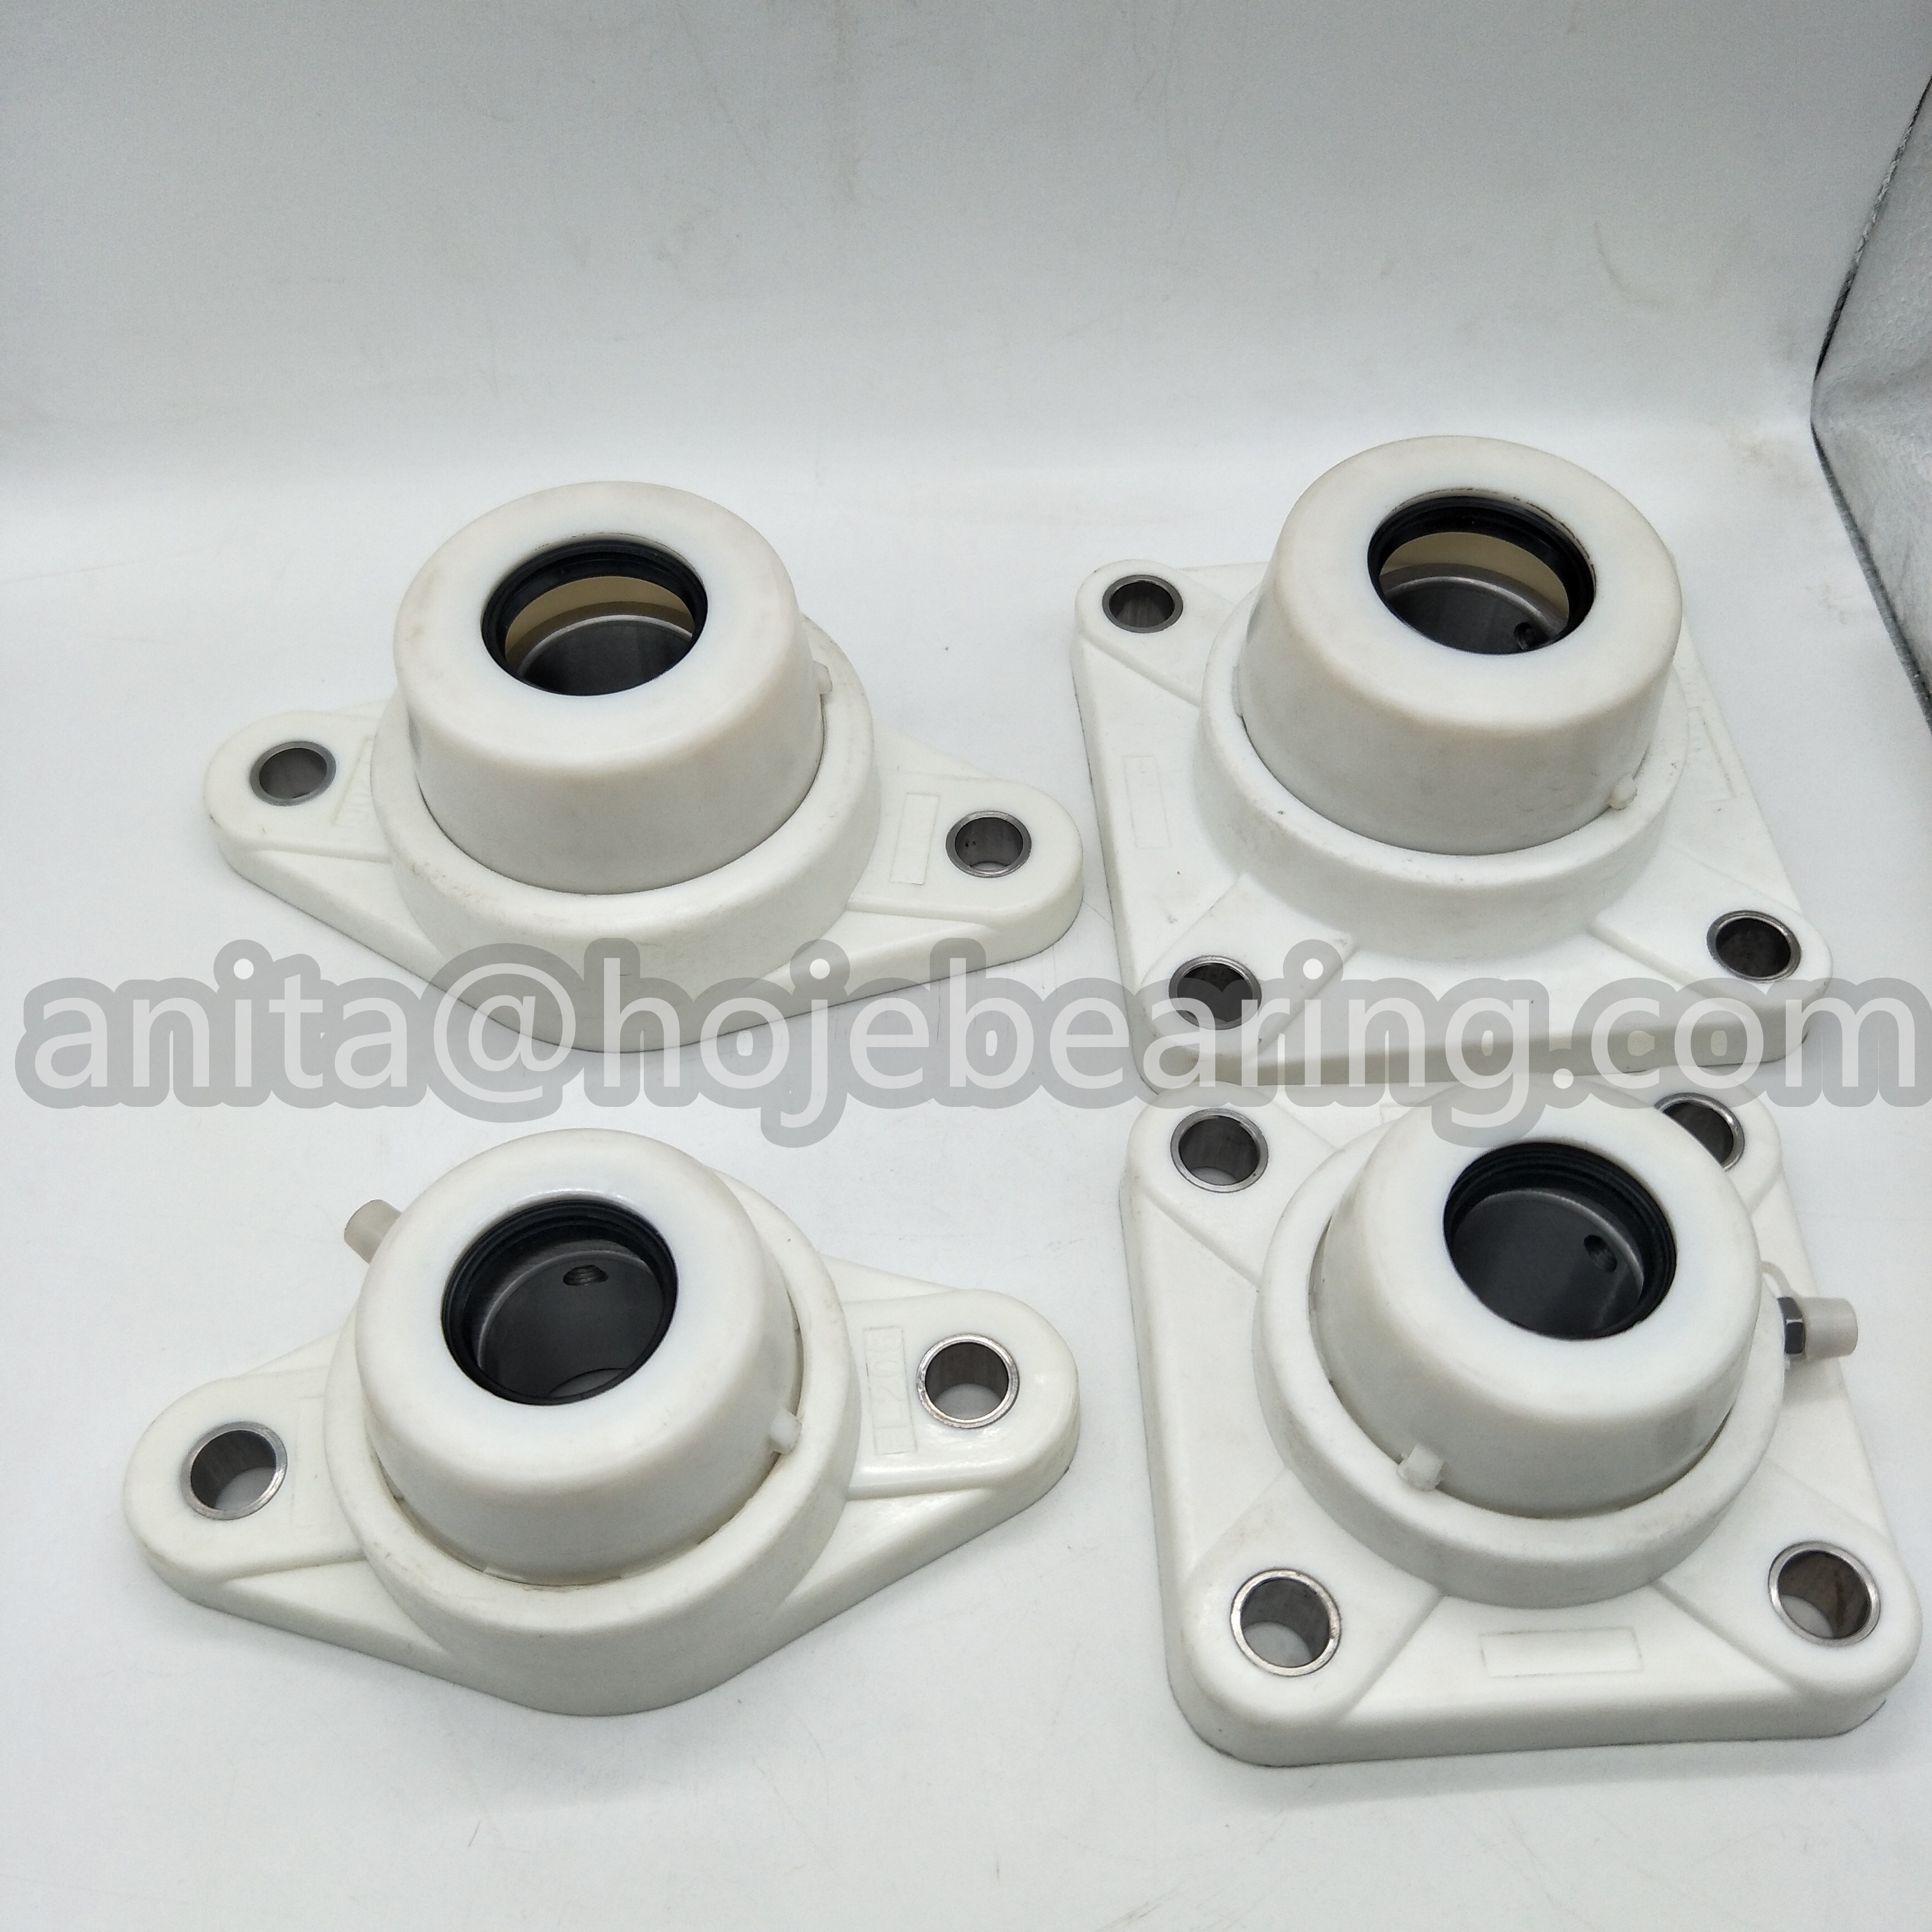 FY 30 WF Mounted Ball Bearing 4-Bolt Square Flanged Unit, Y-bearing square flanged units FY 30 WF，FY 25 WF